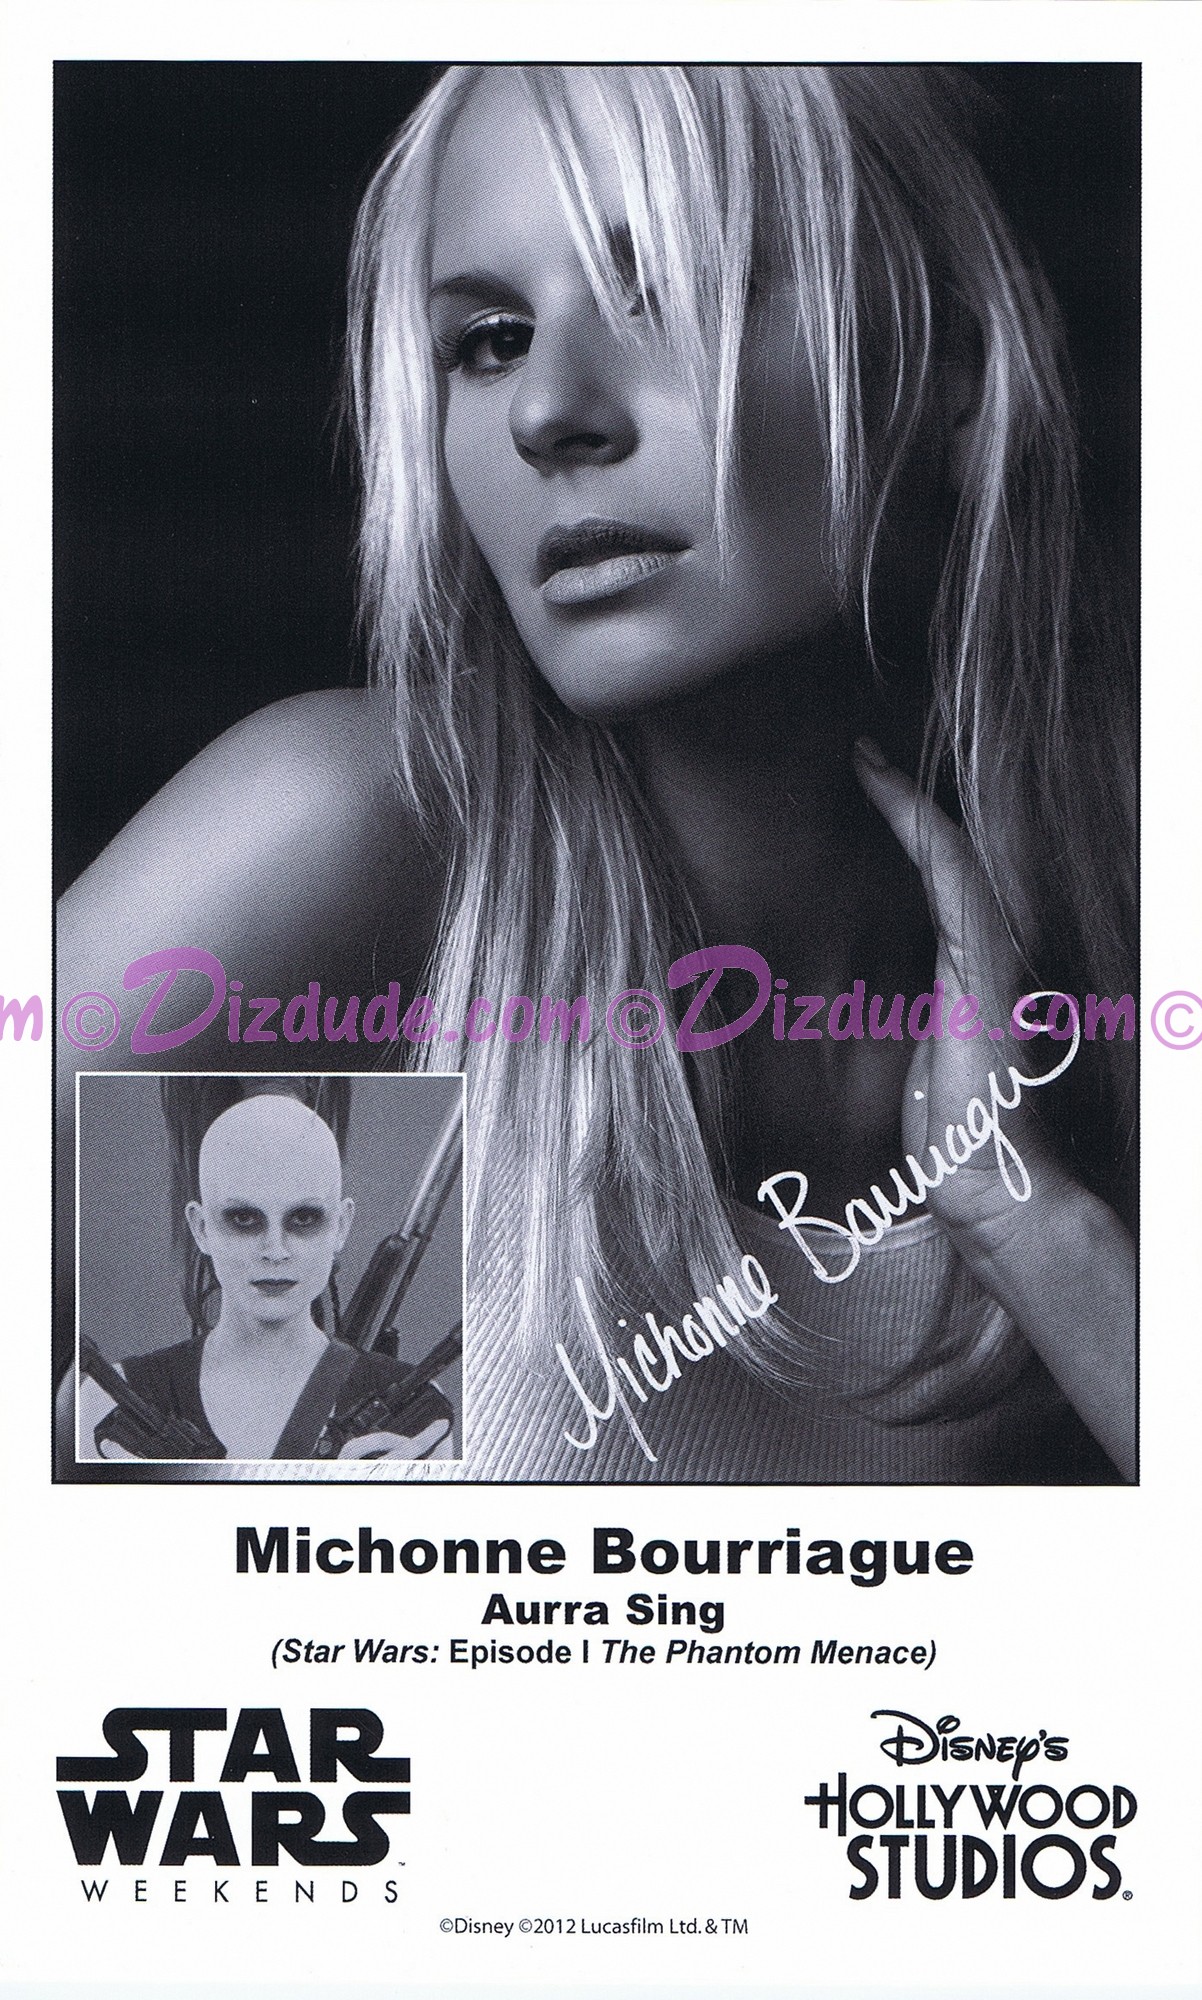 Michonne Bourriague who played Aurra Sing Presigned Official Star Wars Weekends 2012 Celebrity Collector Photo